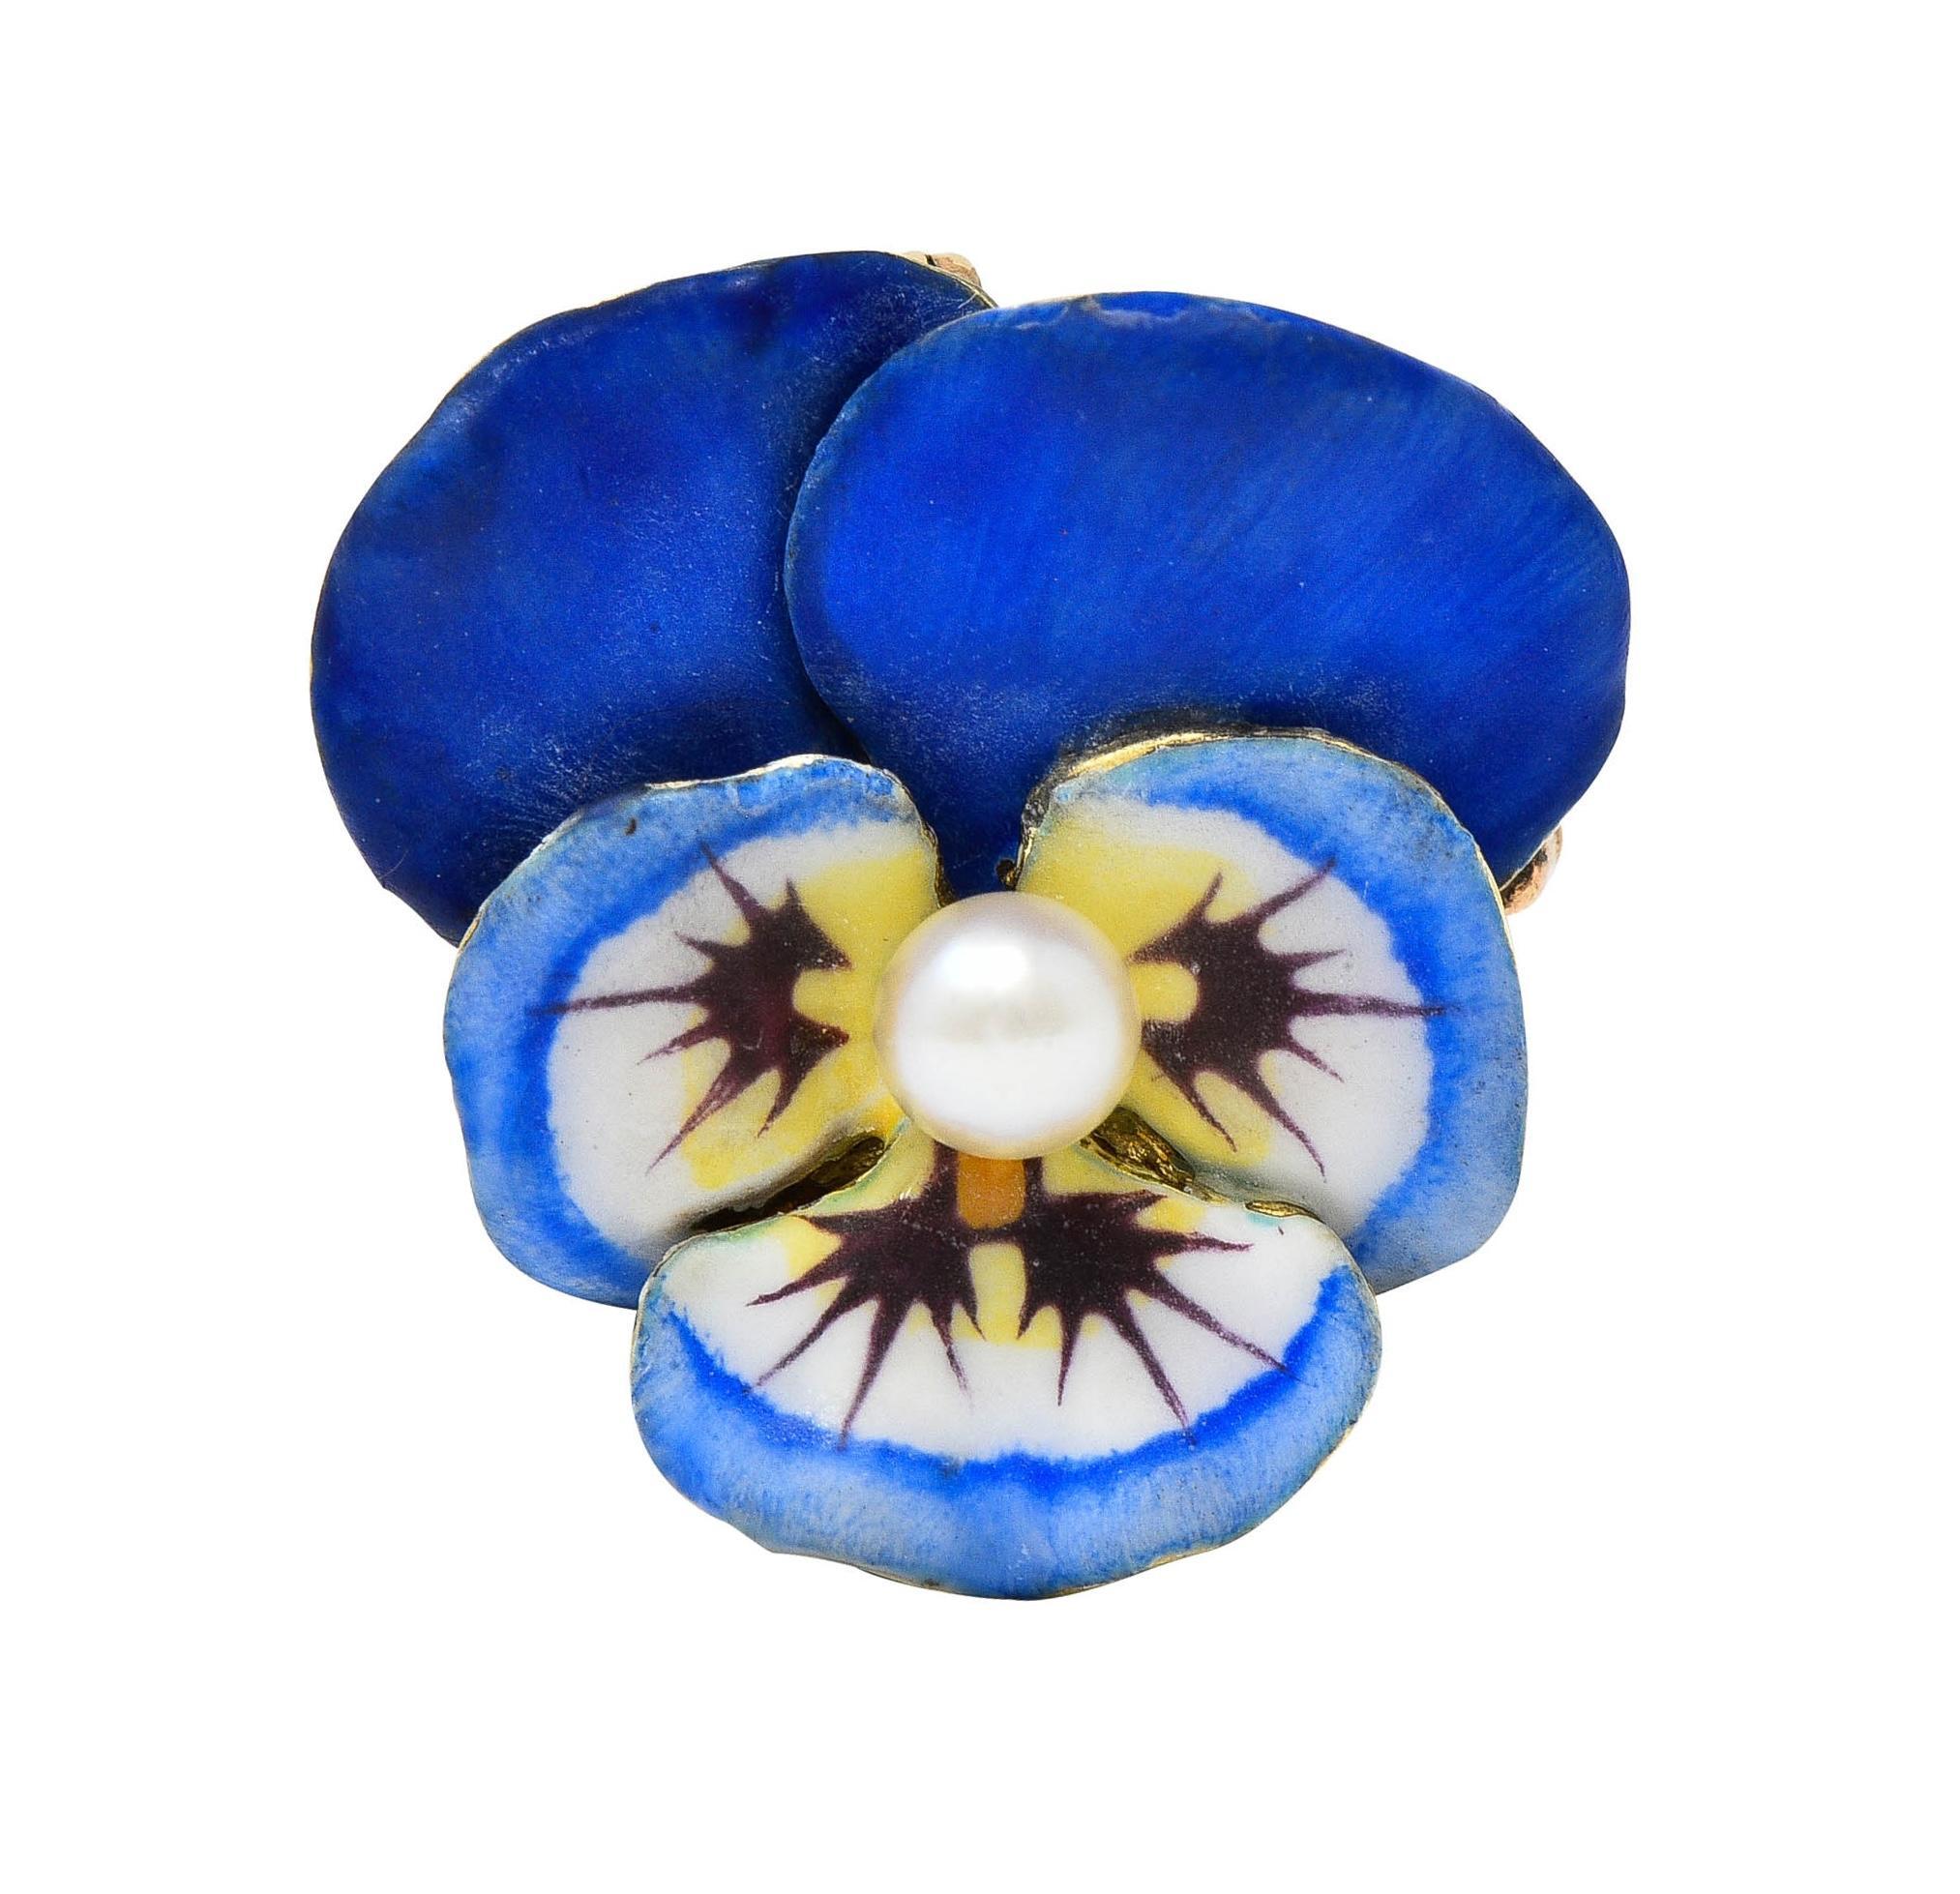 Designed as a dimensional pansy flower painted with enamel 
Opaque white, blue, yellow, and maroon with minimal loss 
Centering a 3.5 mm round pearl
White with subtle iridescence
Completed by hinged optional bale
Wit a hinged pinstem with looped